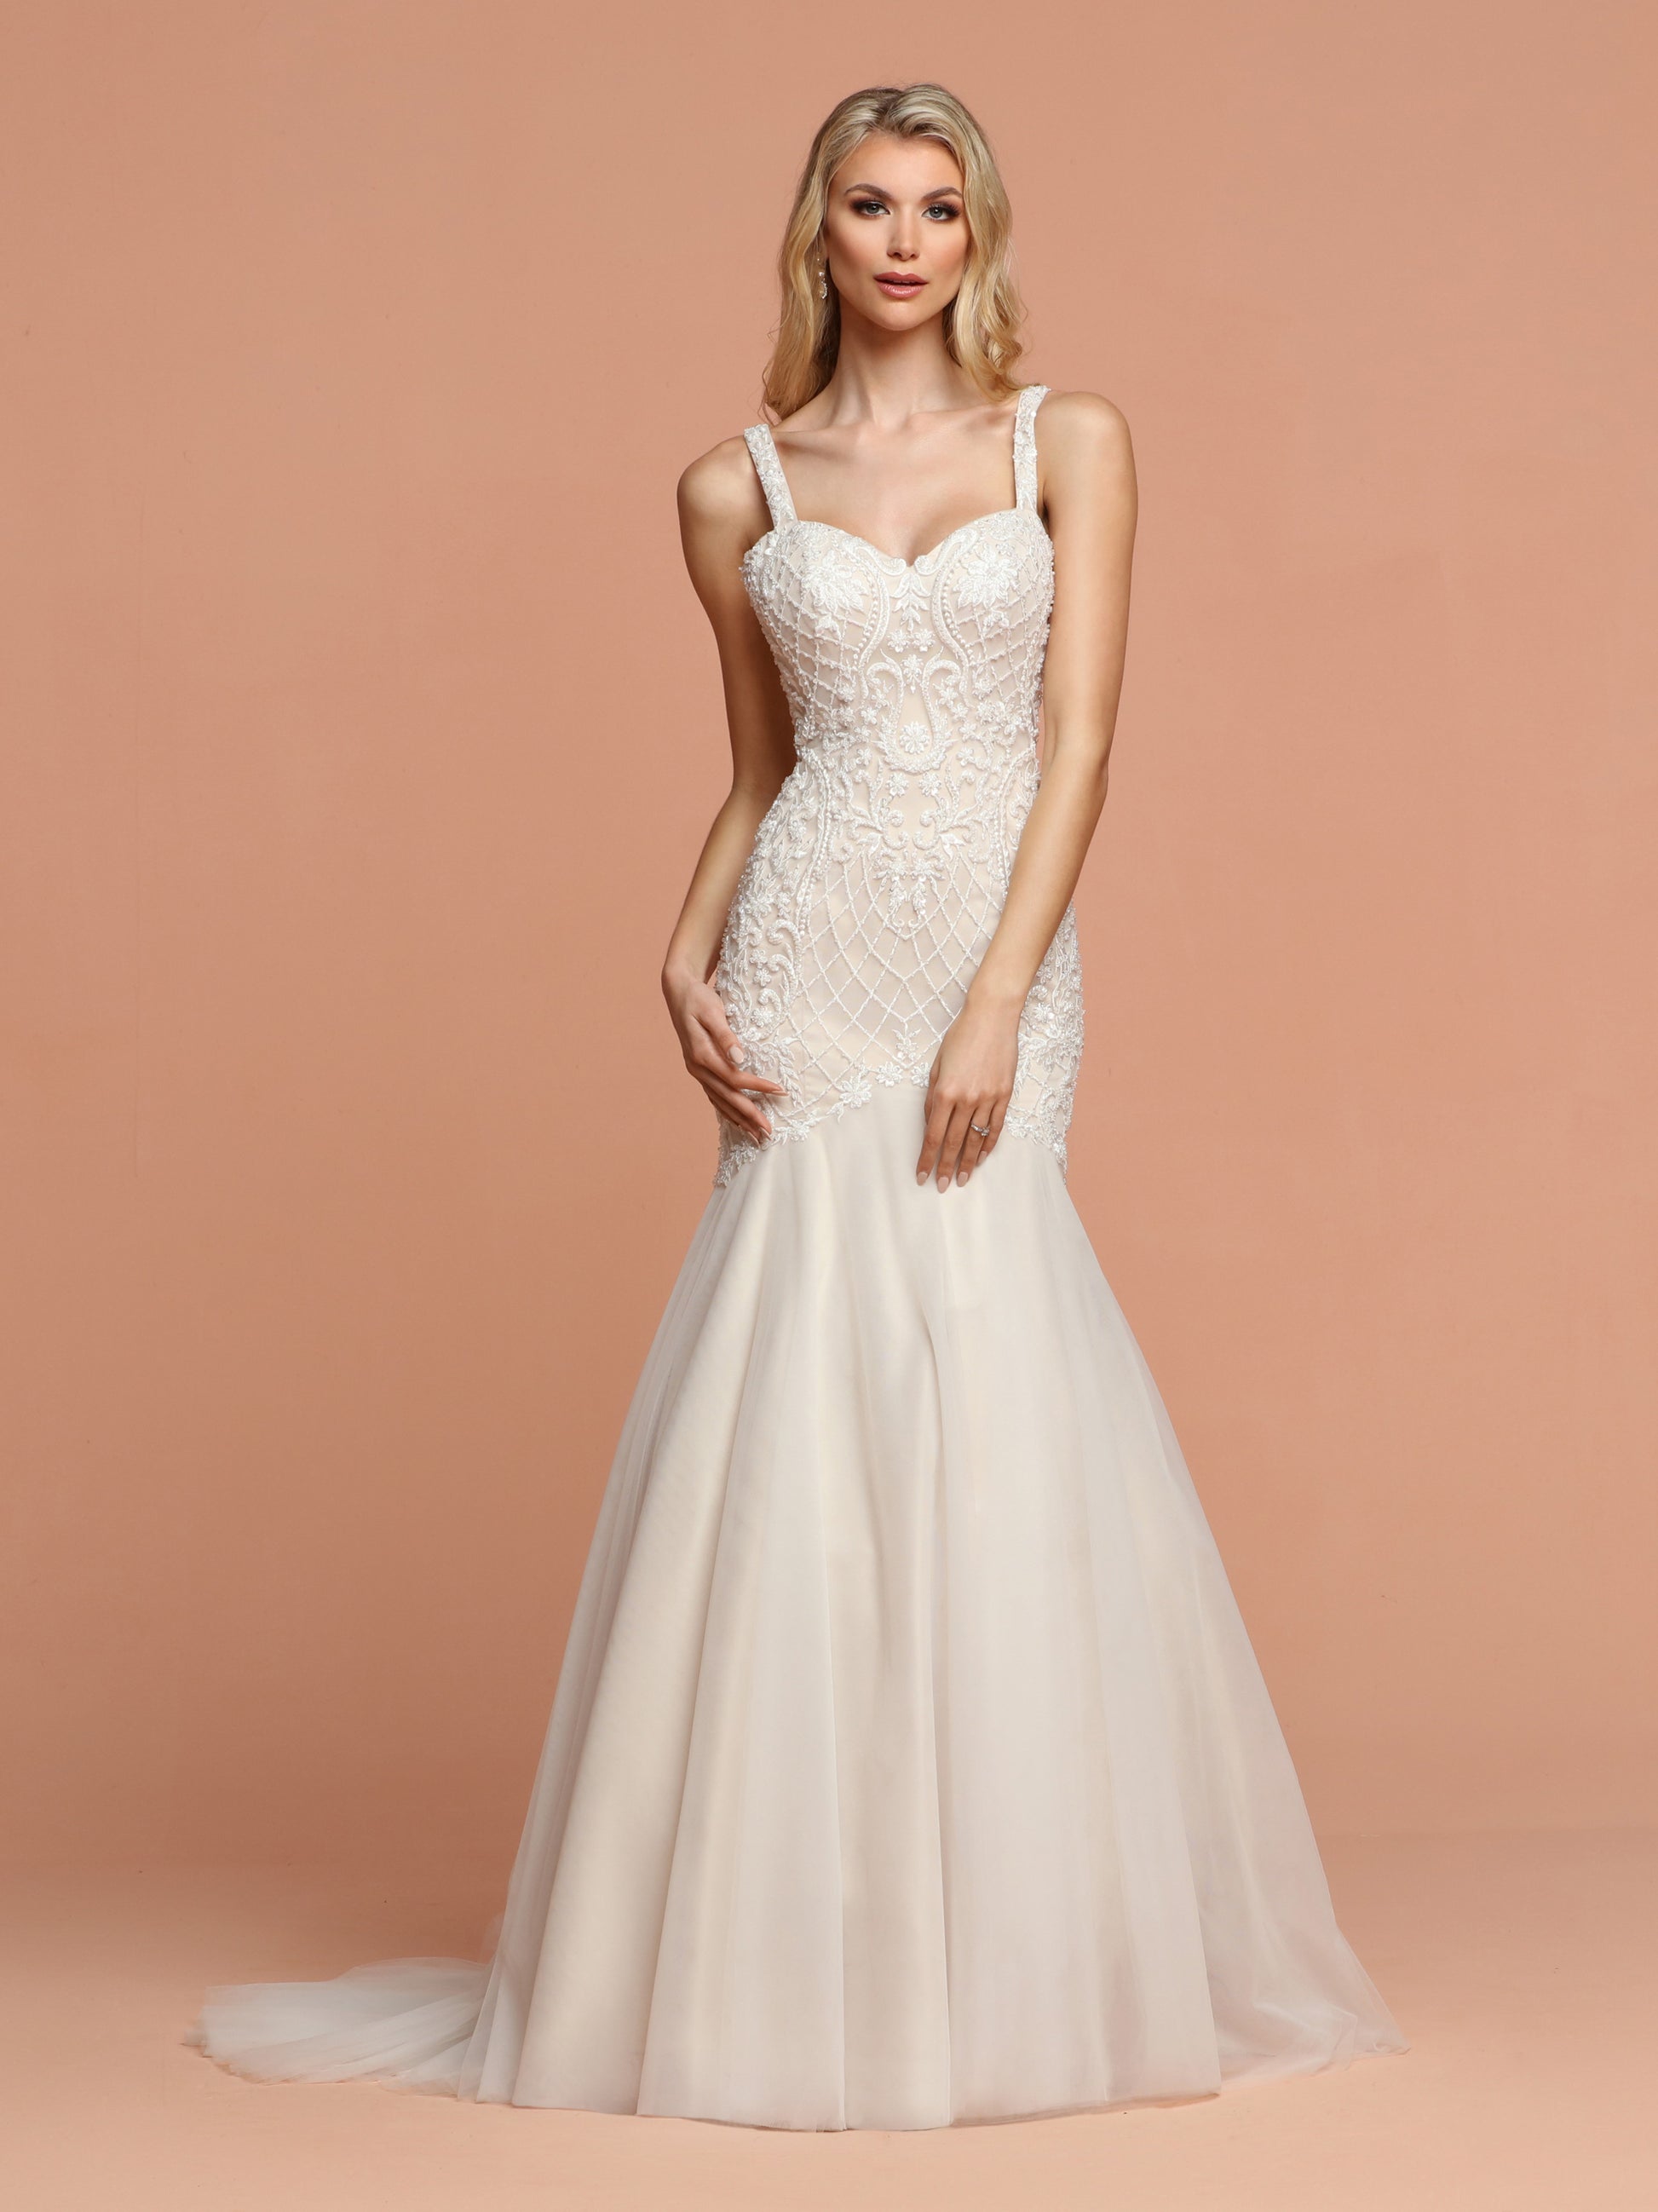 Davinci Bridal Style 50600 is a Long Fitted Mermaid Silhouette Wedding Dress with a sweetheart neckline with an embroidered Bodice with Embellishments. Wide straps with an open back. Full Soft Tulle Fit & Flare skirt has a lovely tulle train  Available for 1-2 Week Delivery!!!  Available Sizes: 2,4,6,8,10,12,14,16,18,20  Available Colors: Ivory/Nude, Ivory/Ivory